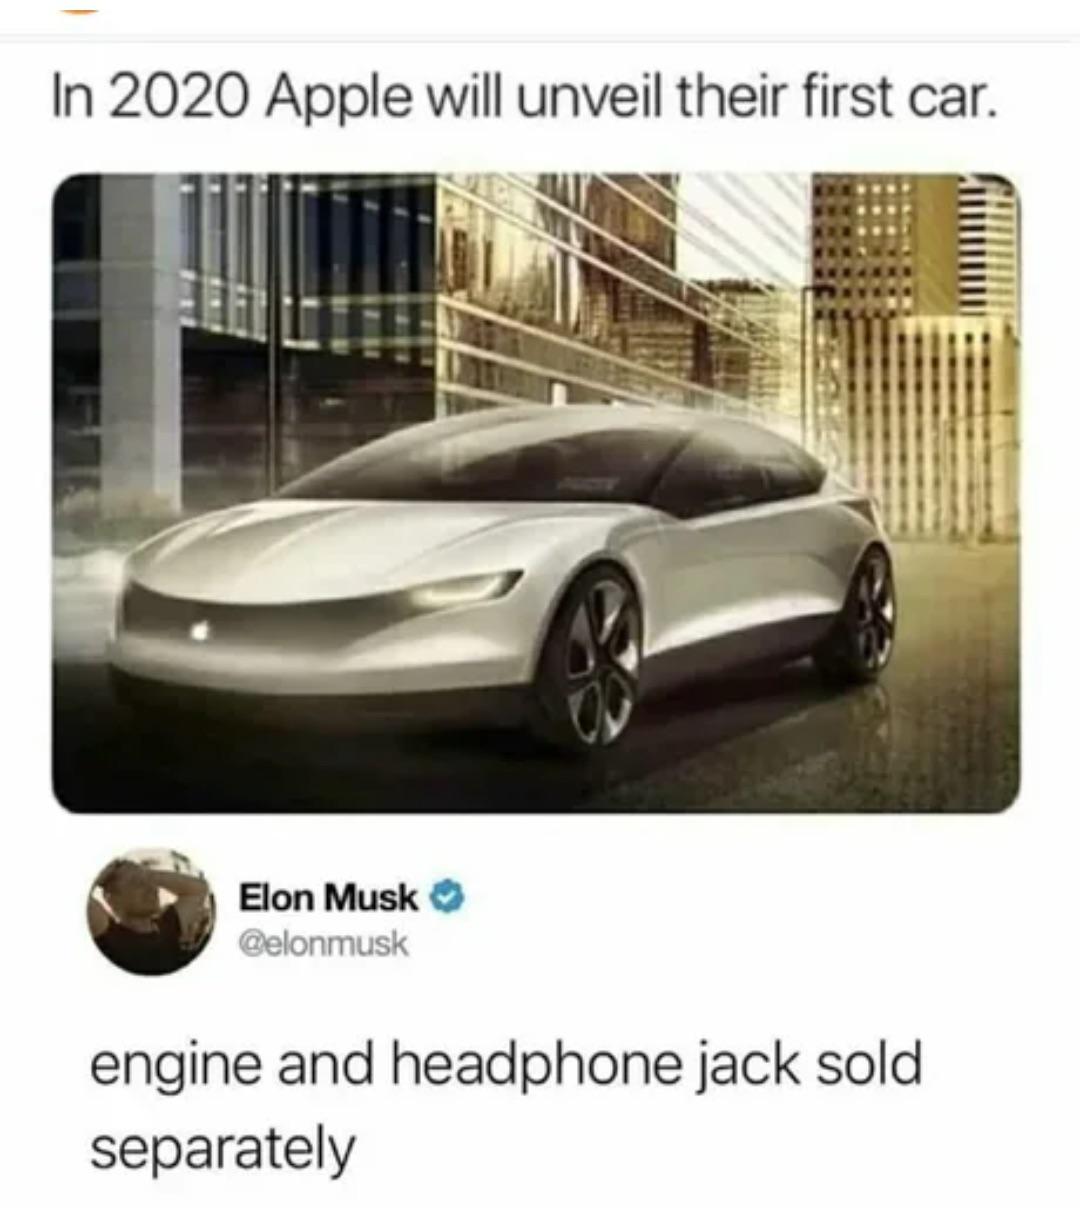 apple car meme - In 2020 Apple will unveil their first car. Elon Musk engine and headphone jack sold separately